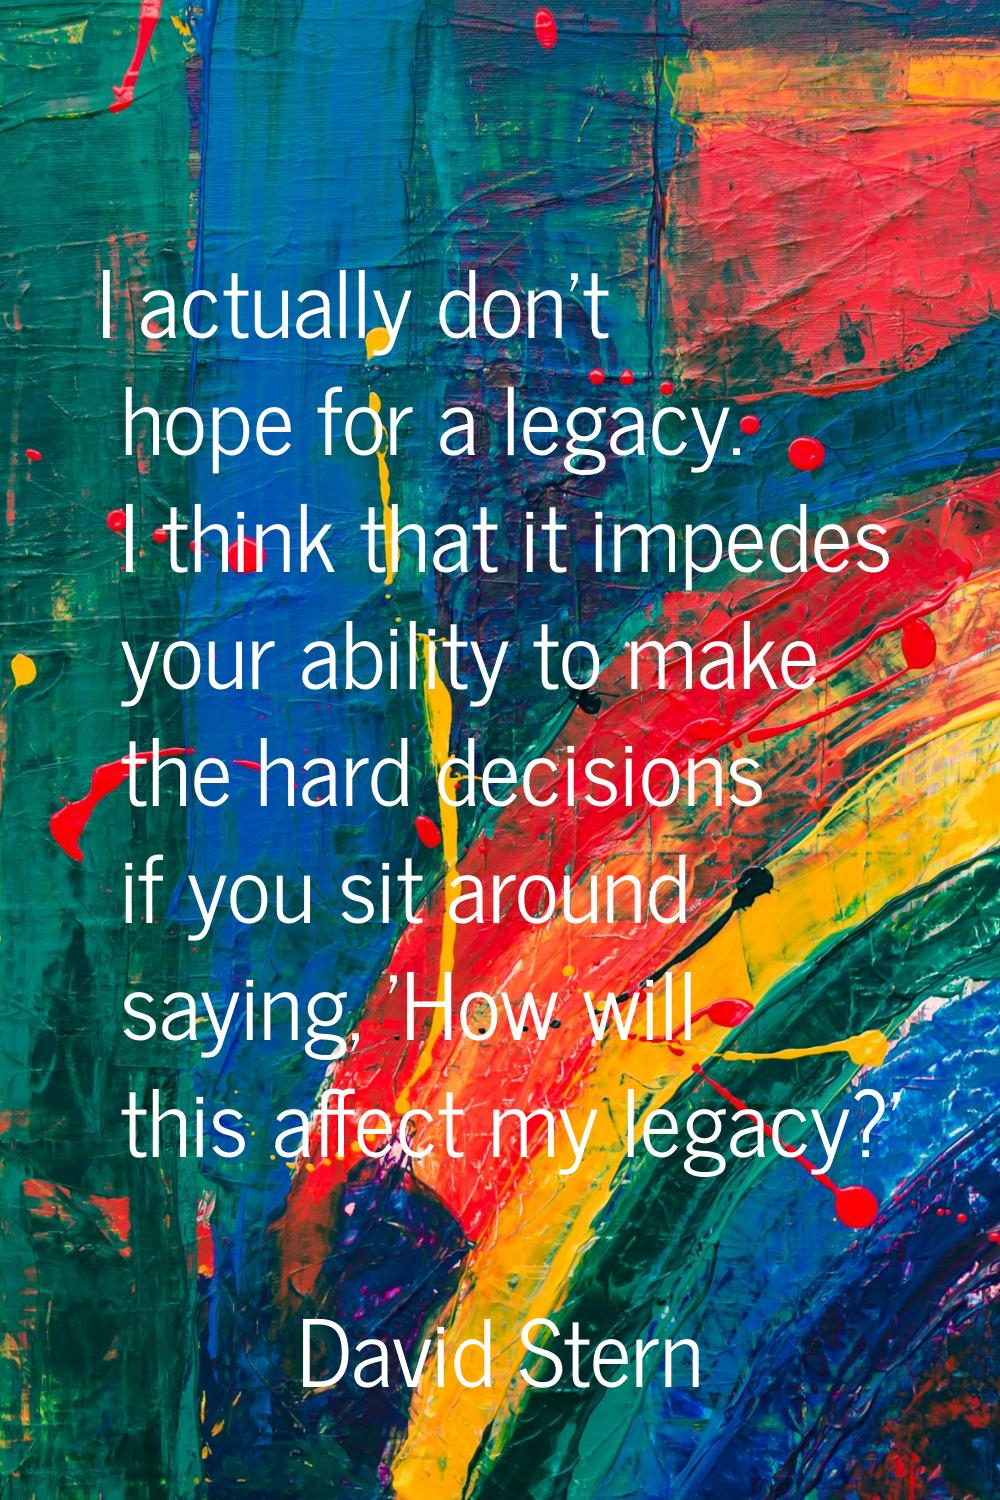 I actually don't hope for a legacy. I think that it impedes your ability to make the hard decisions